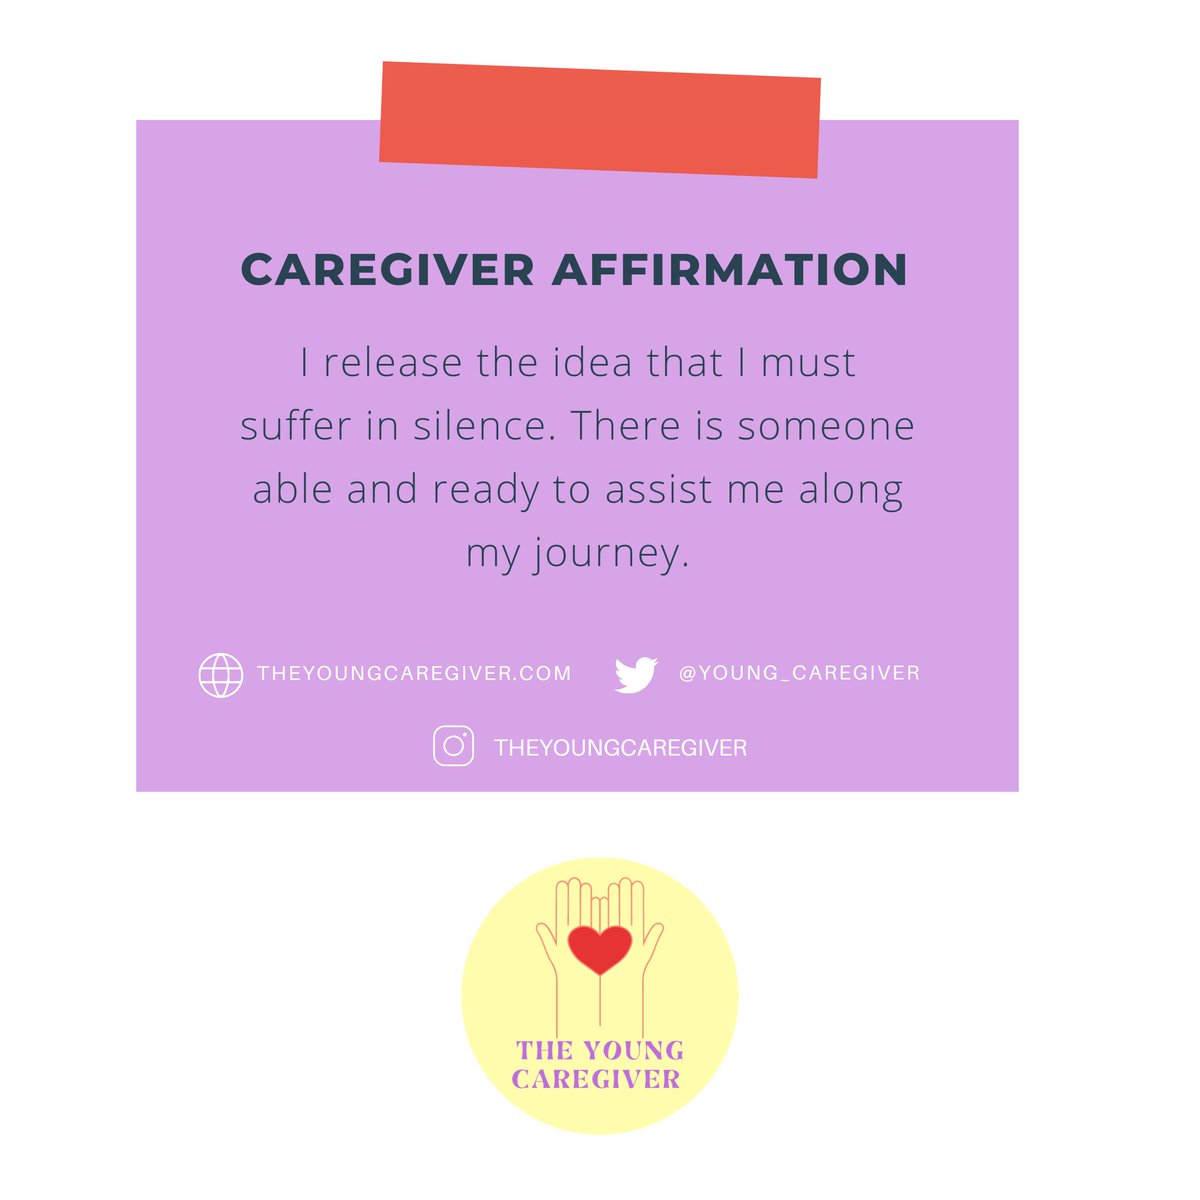 Therapy helped me during my caregiver journey. While unemployed I found discounted therapy with an income based doctors office. Don't suffer in silence. It's ok not to be ok but you have to take the steps necessary to help yourself. #theyoungcaregiver #caregiveraffirmations